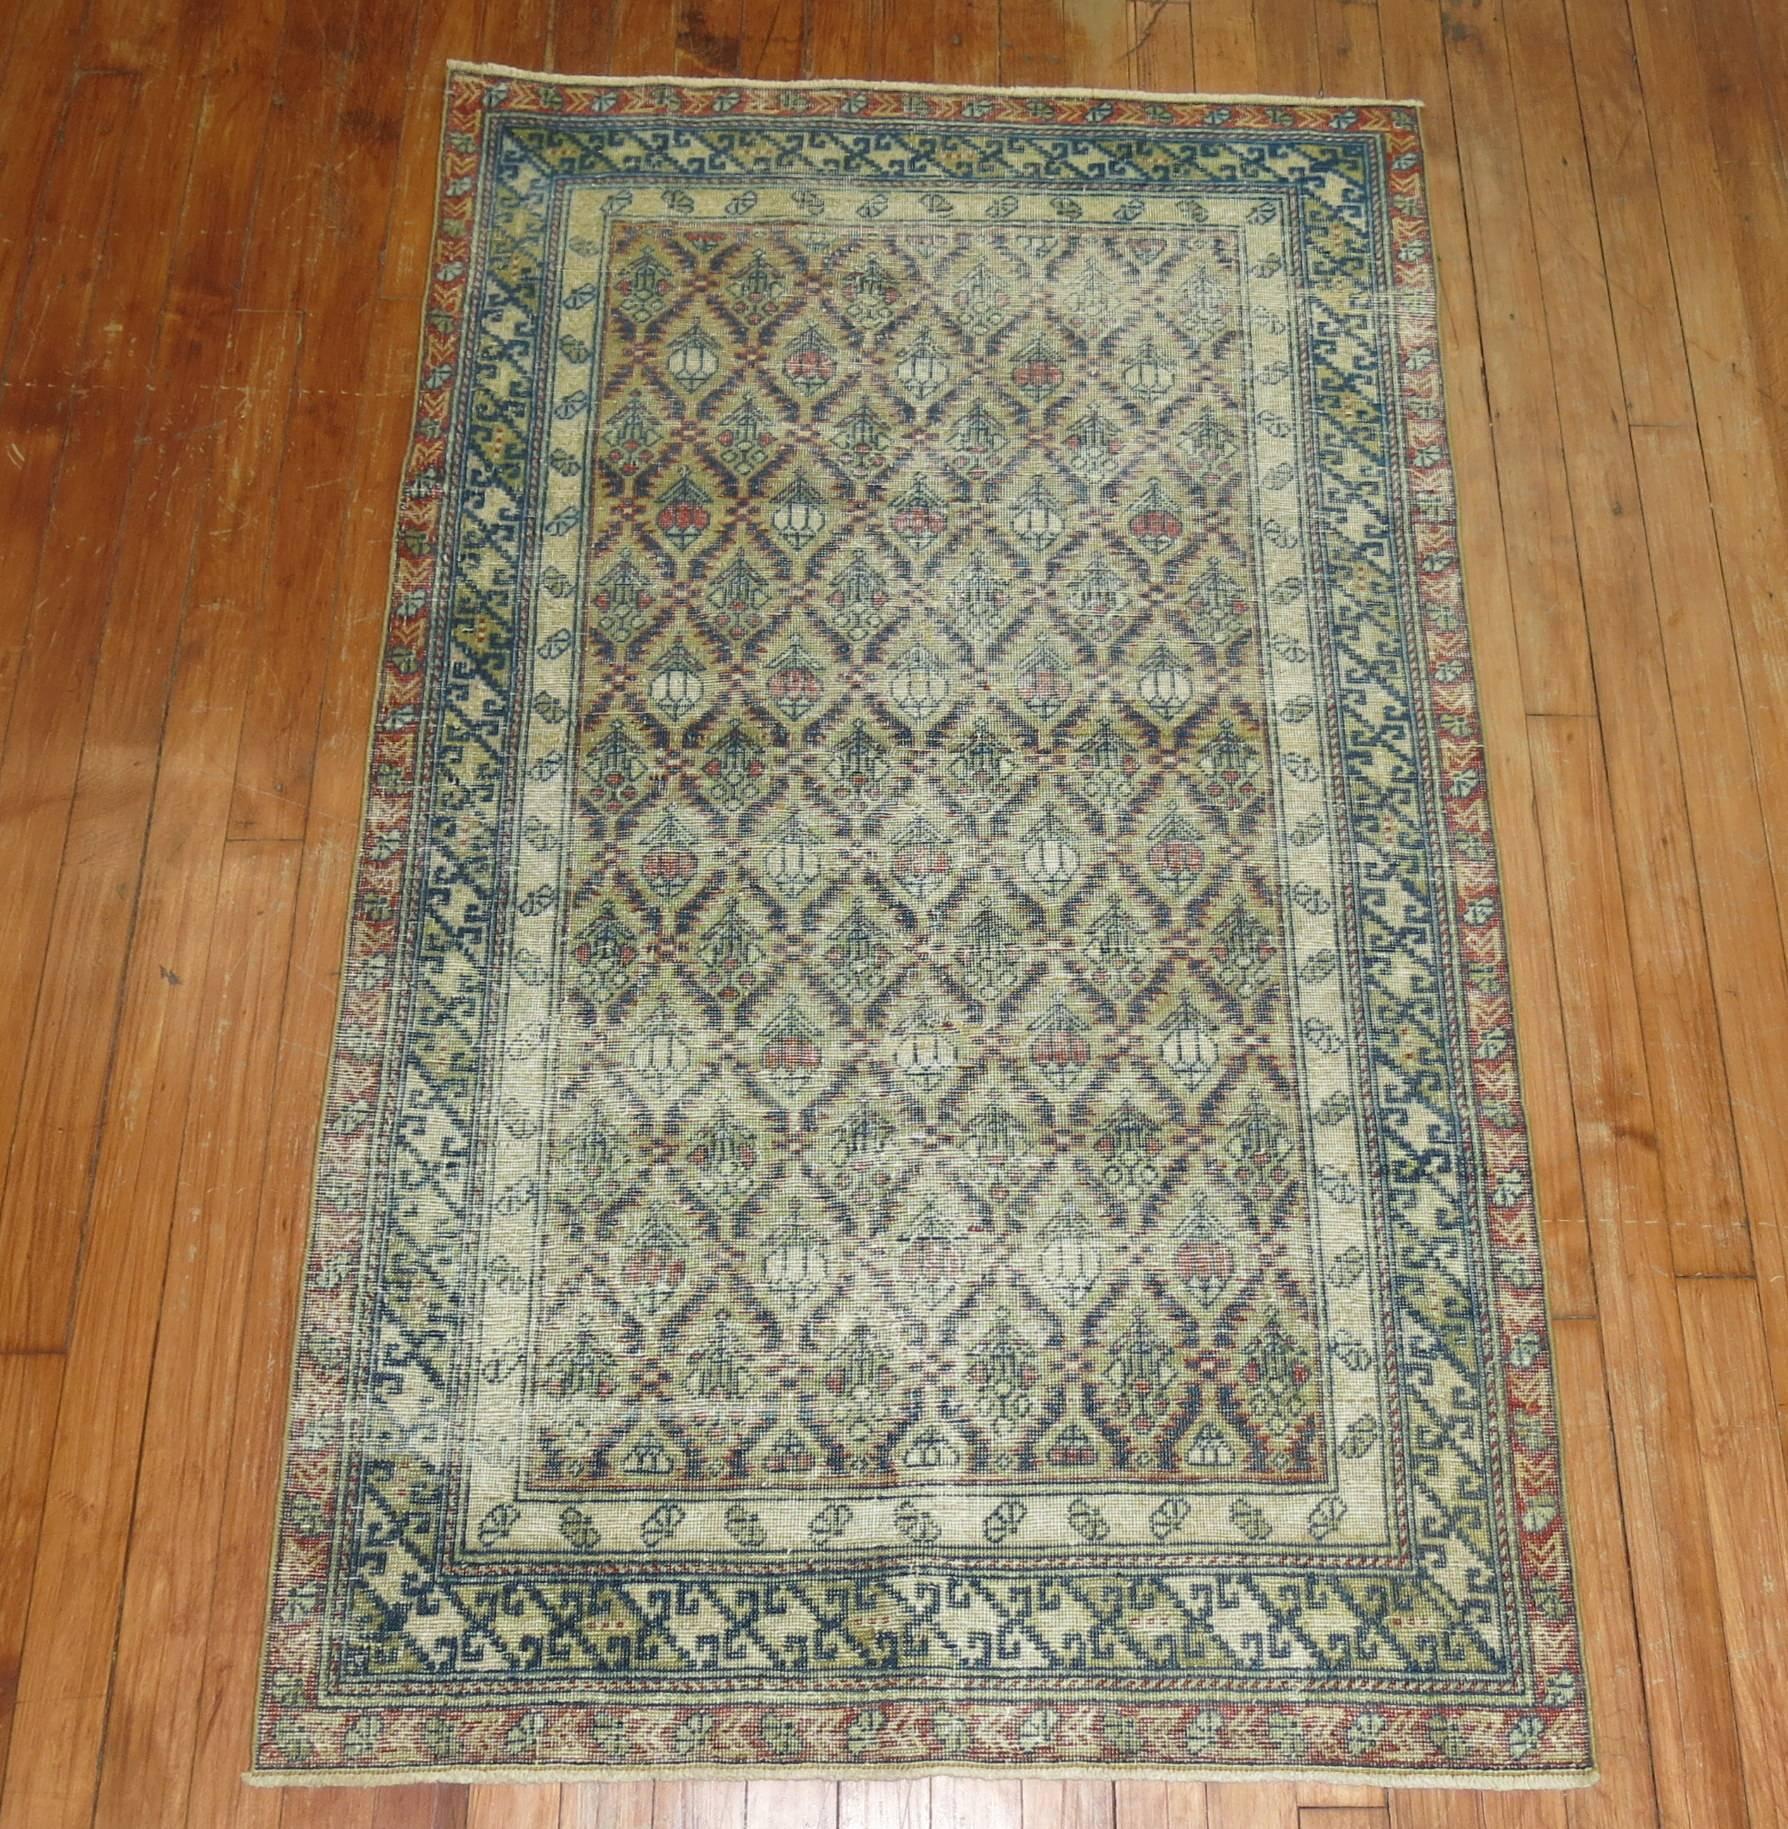 An early 20th-century antique Caucasian Shirvan distressed rug.

2'7'' x 4'7''